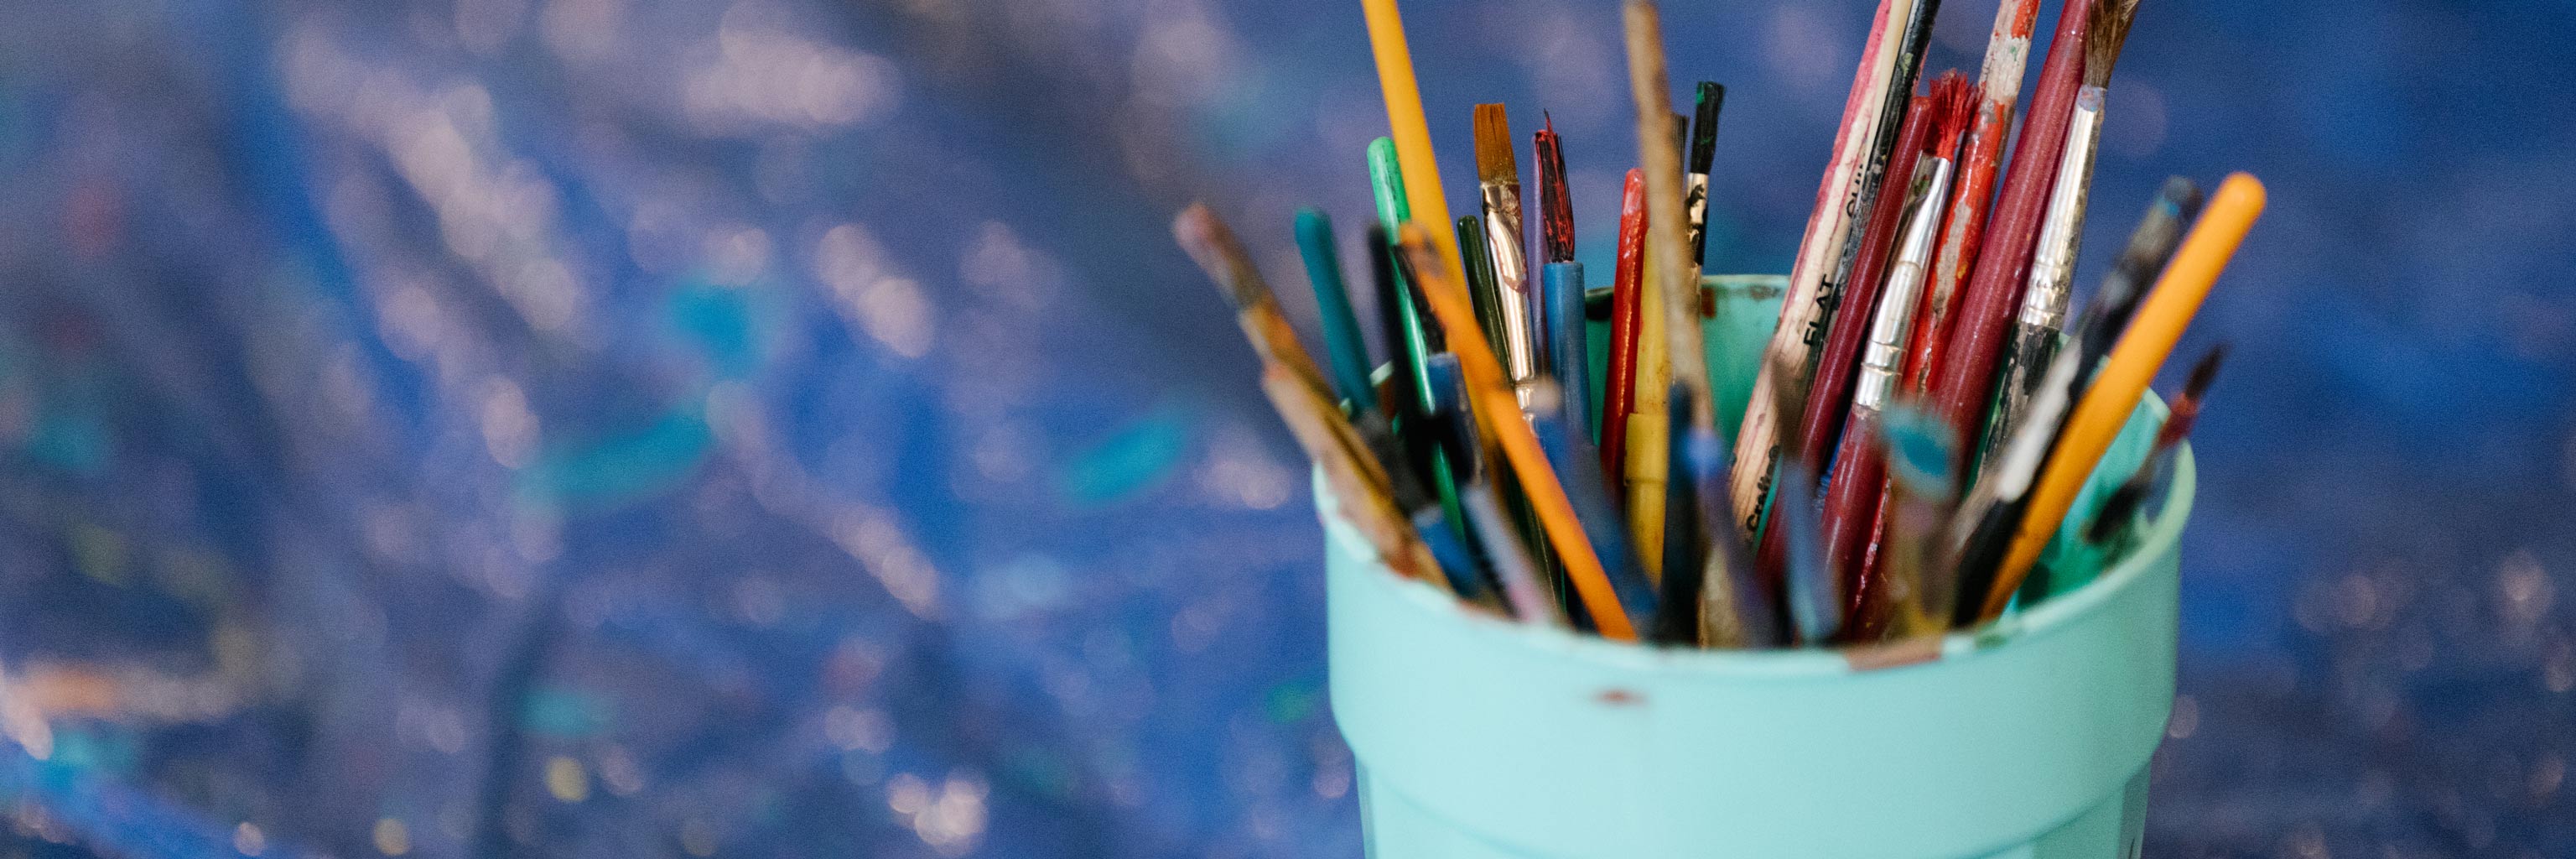 Close up of a cup full of paint brushes